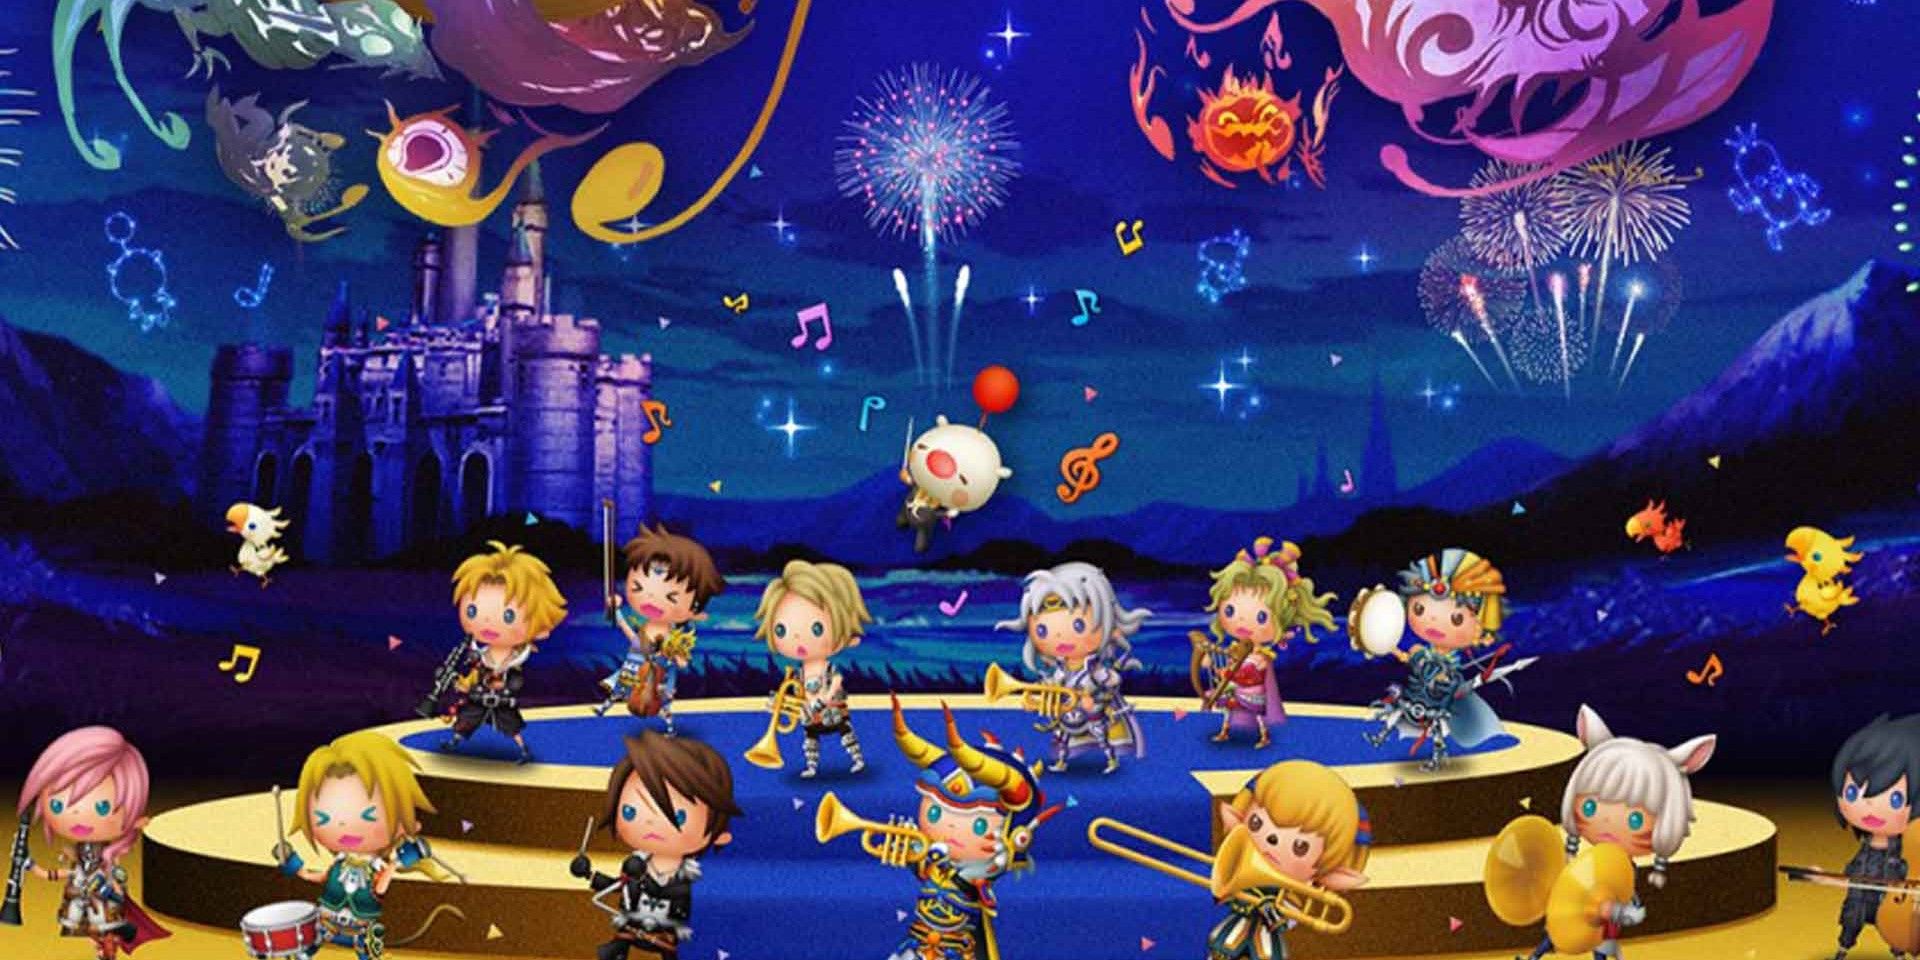 Theatrhythm Final Bar Line - Image showcasing the game's music notes and rhythm gameplay.